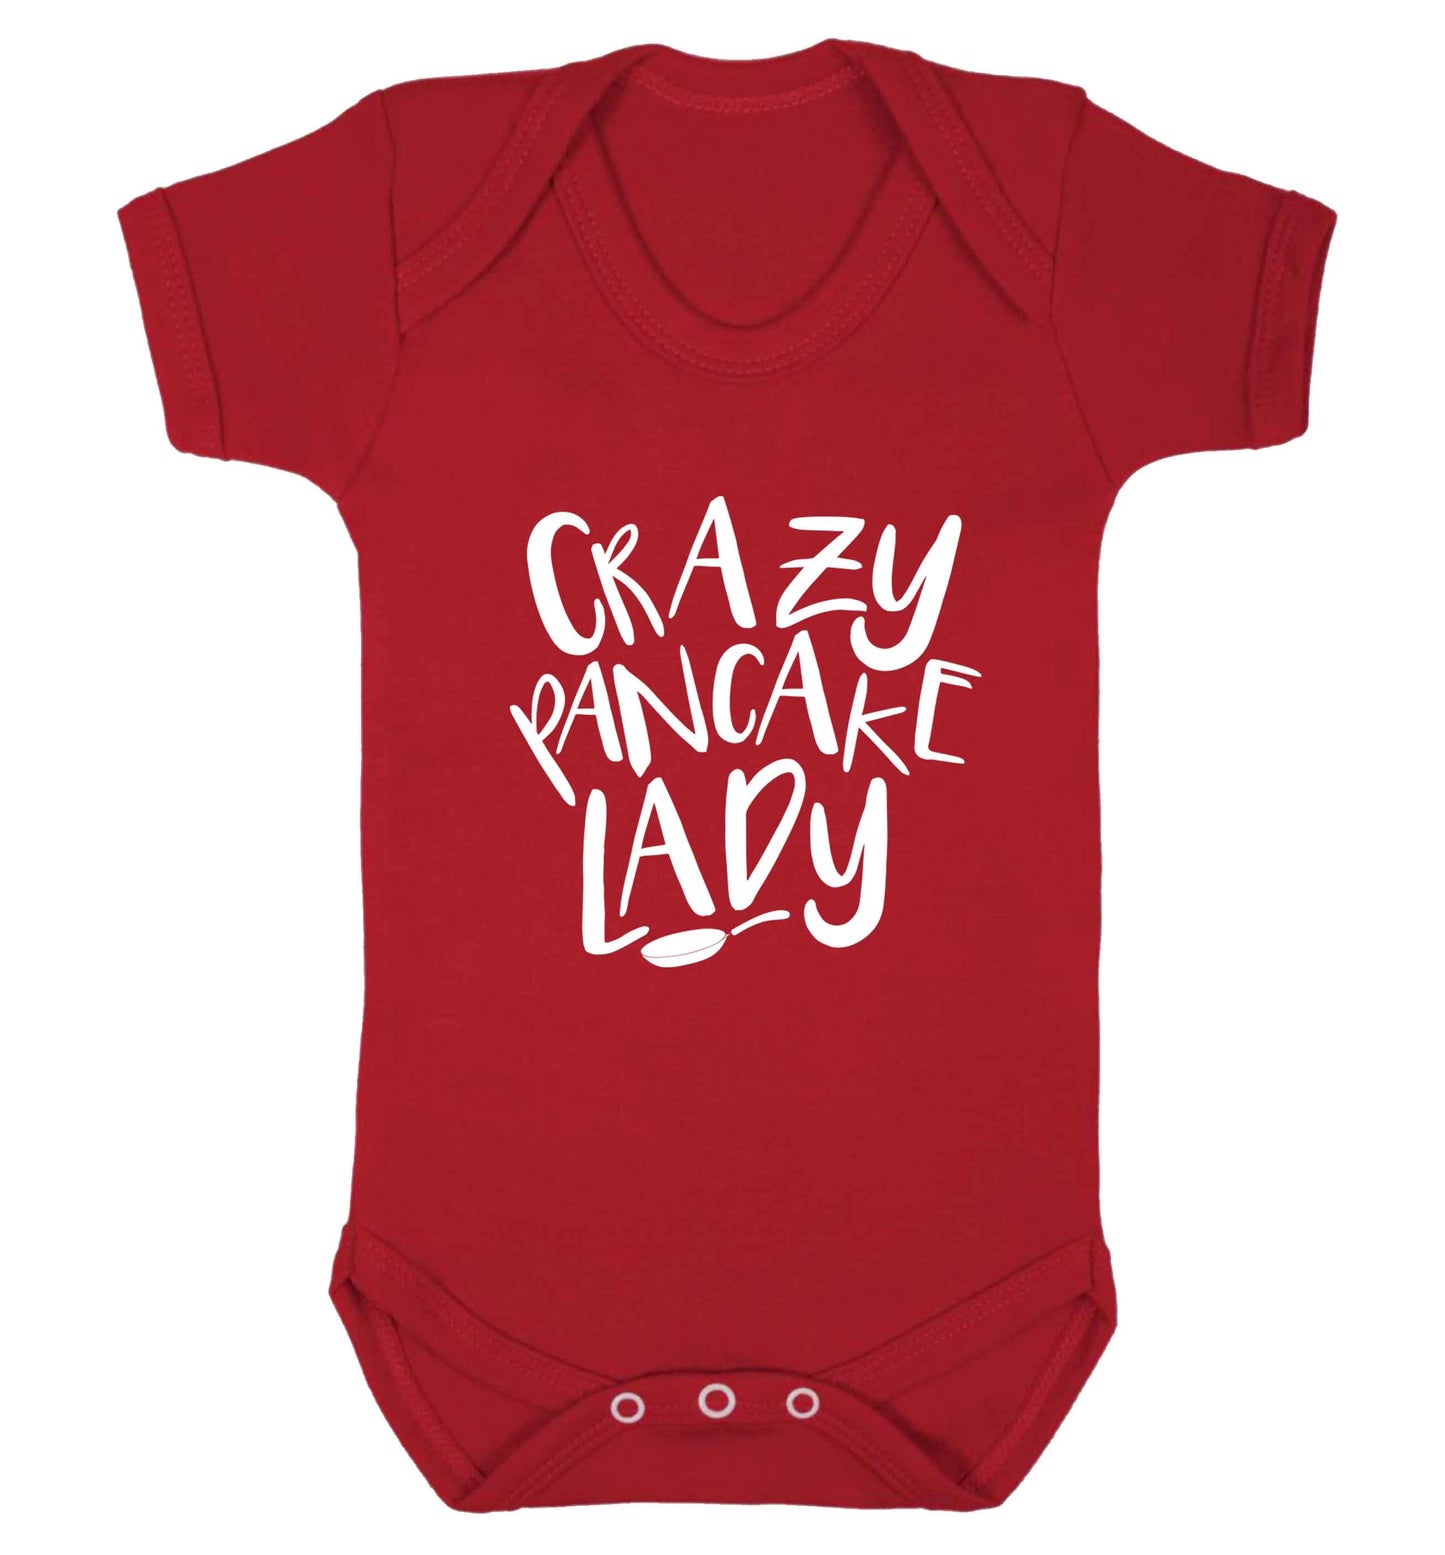 Crazy pancake lady baby vest red 18-24 months